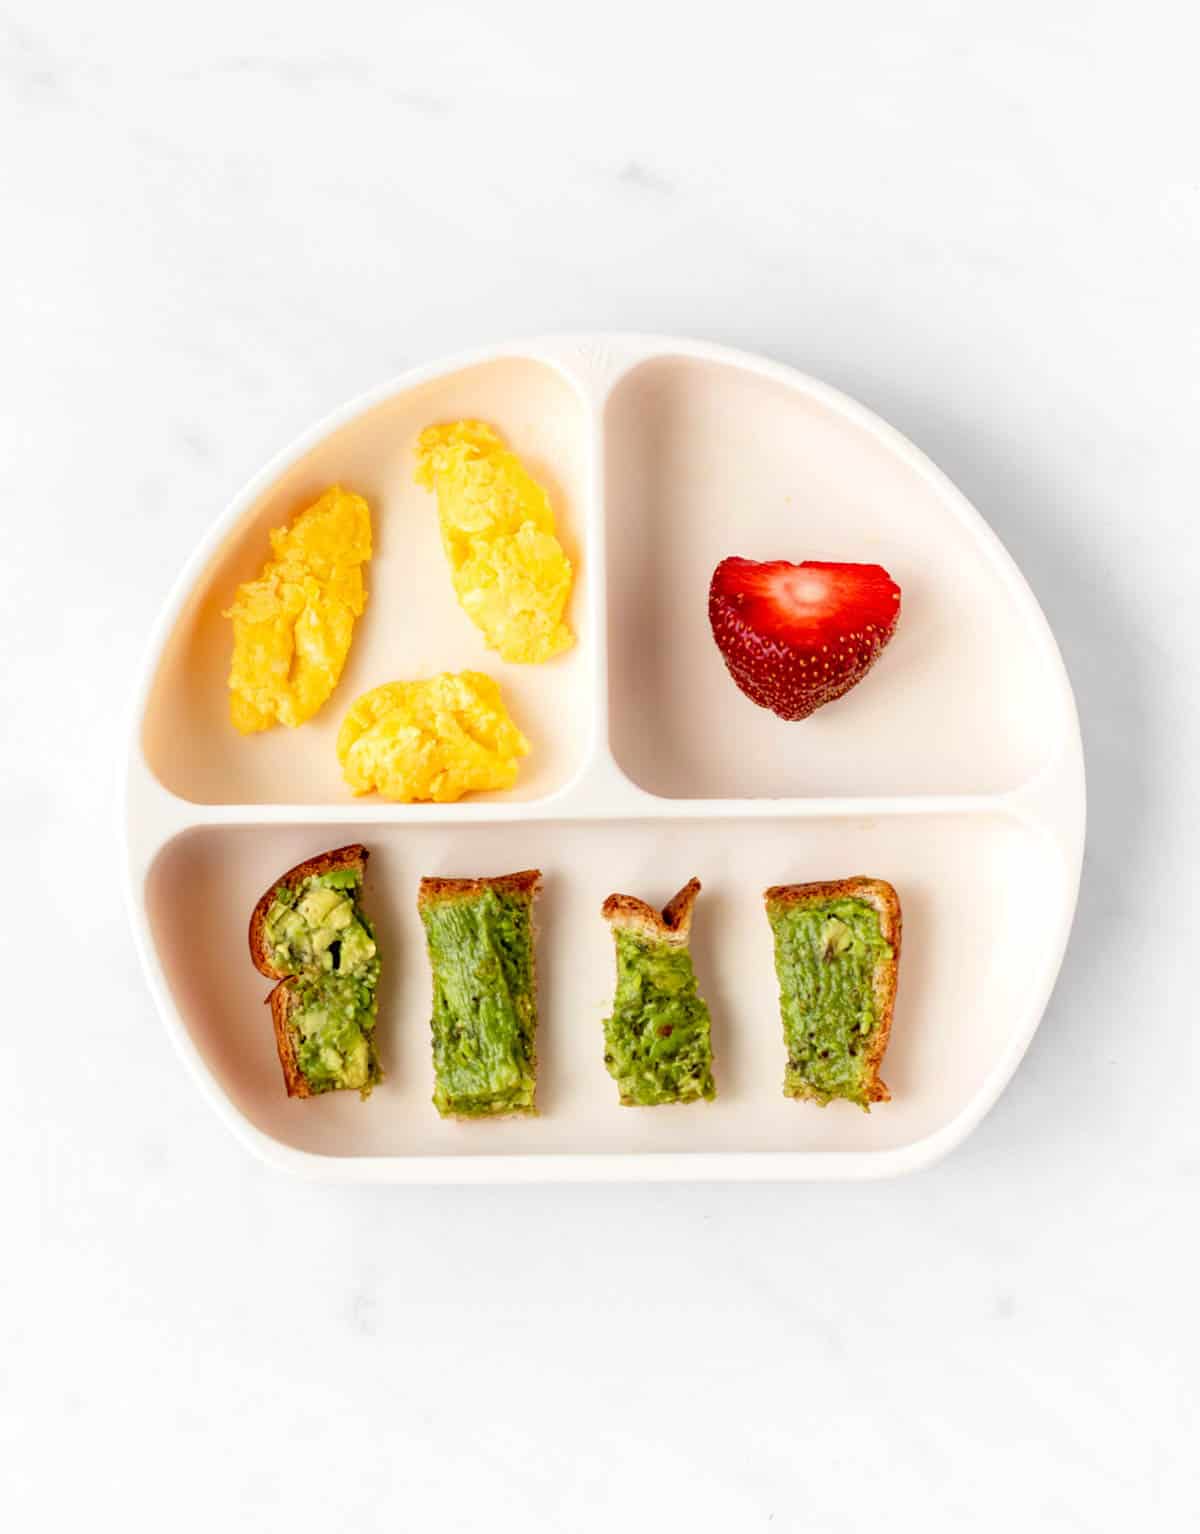 Scrambled eggs, avocado toast strips and a strawberry on a divided plate.